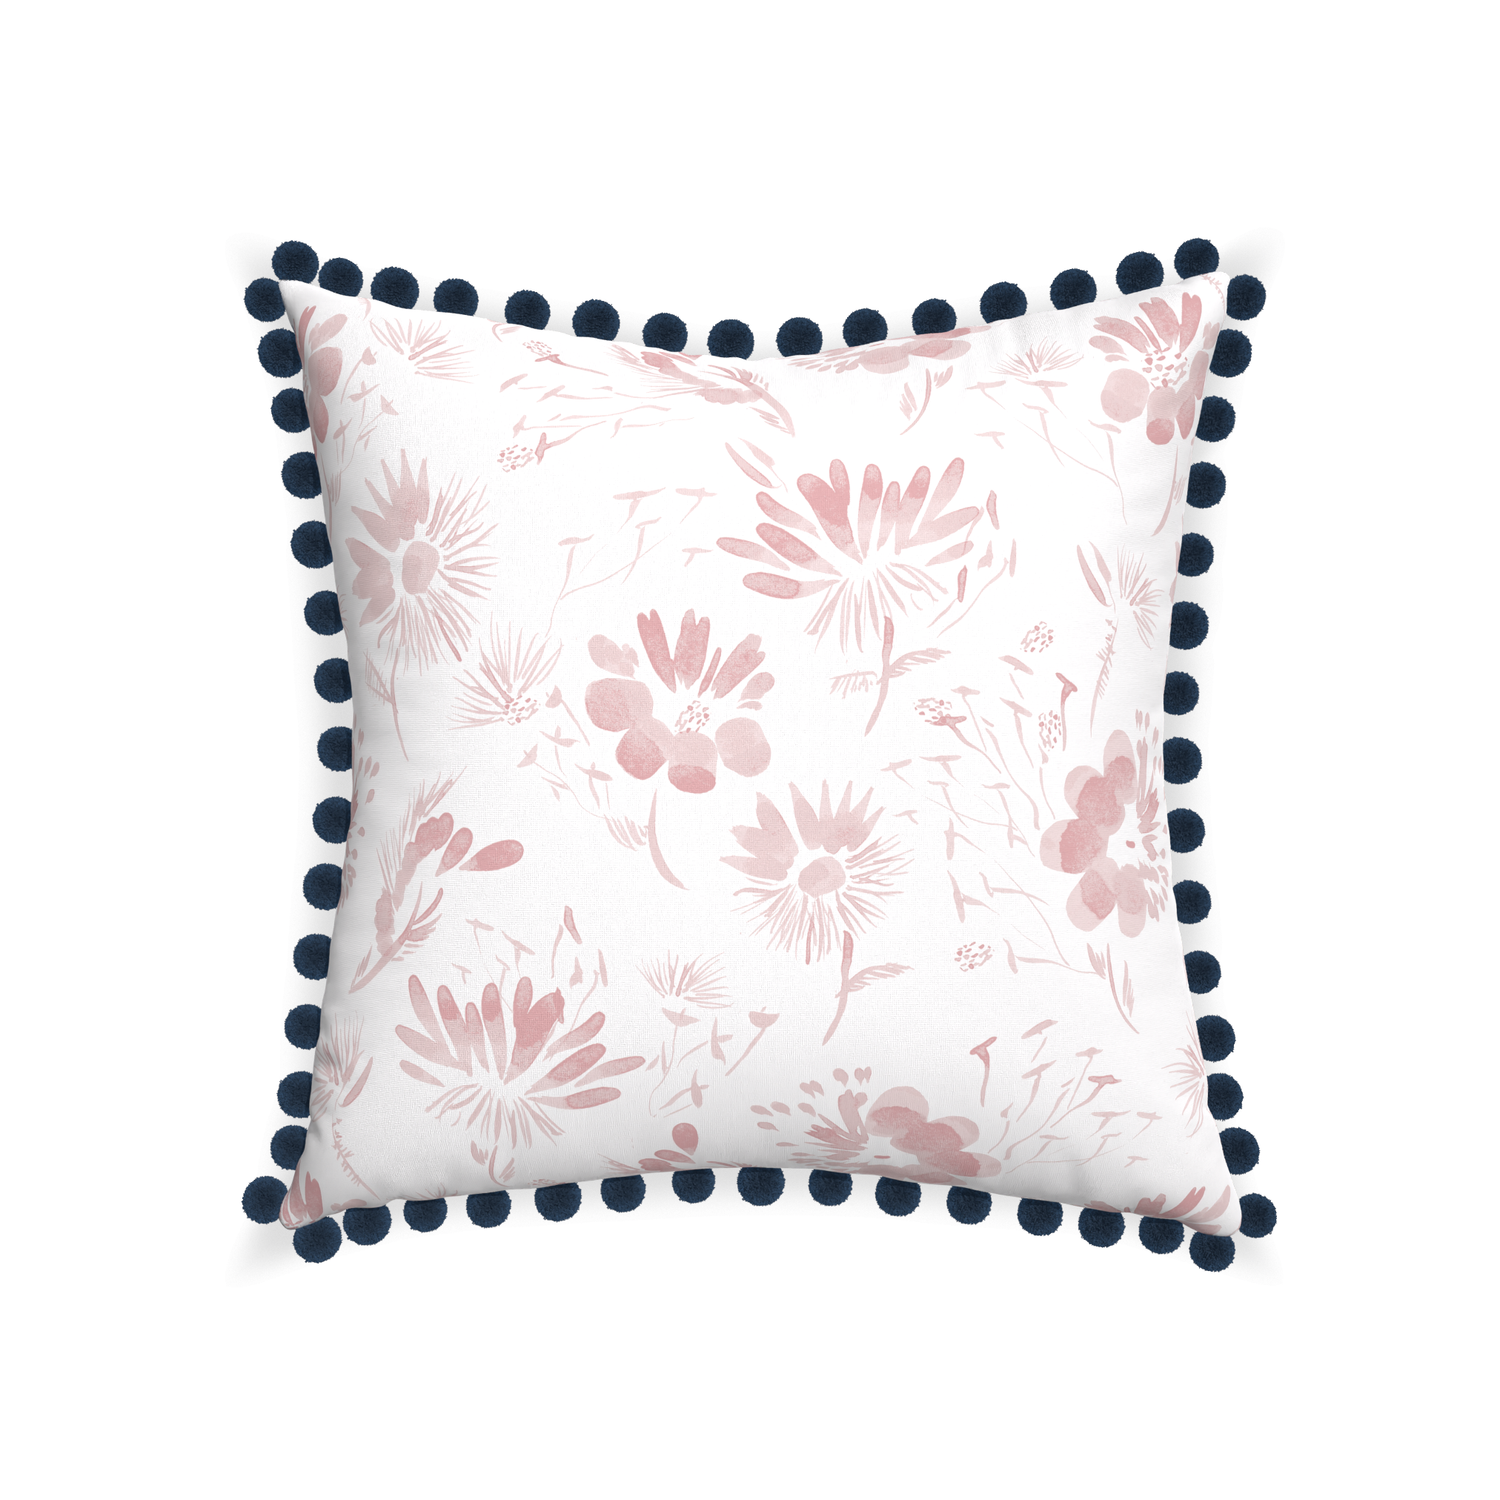 22-square blake custom pink floralpillow with c on white background